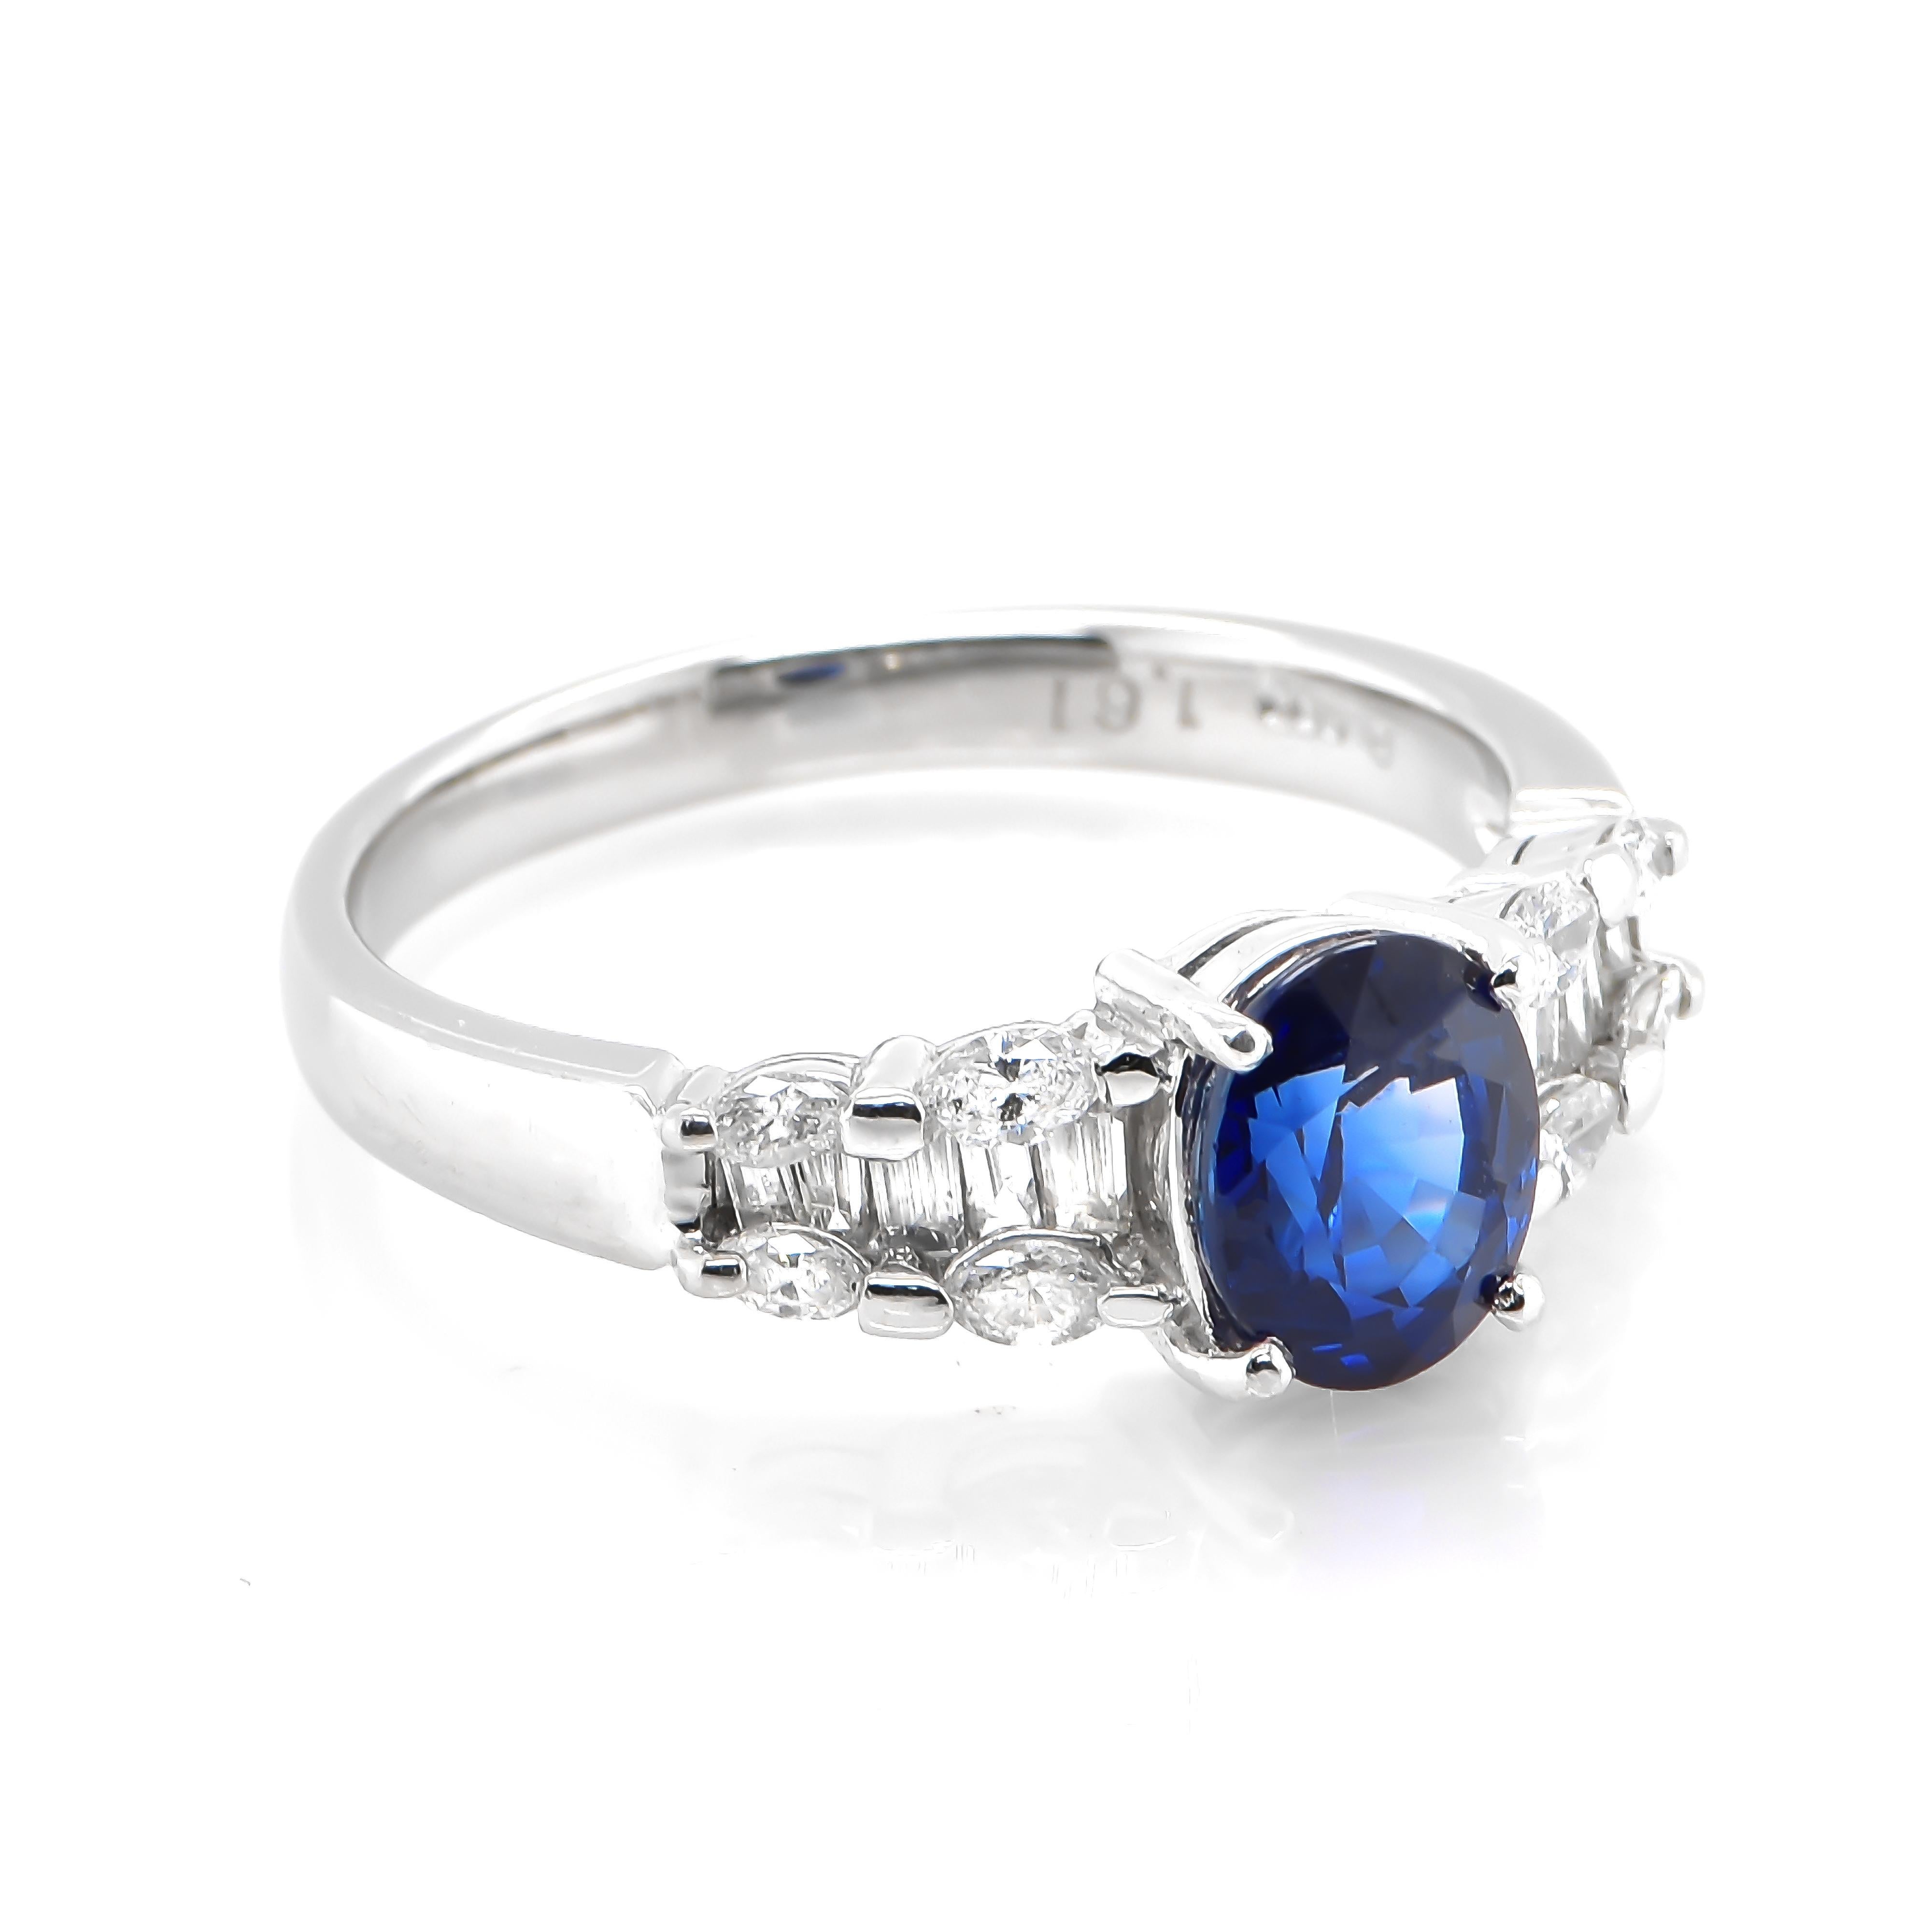 A beautiful ring featuring 1.61 Carat Natural Royal Blue Sapphire and 0.45 Carats Diamond Accents set in Platinum. Sapphires have extraordinary durability - they excel in hardness as well as toughness and durability making them very popular in